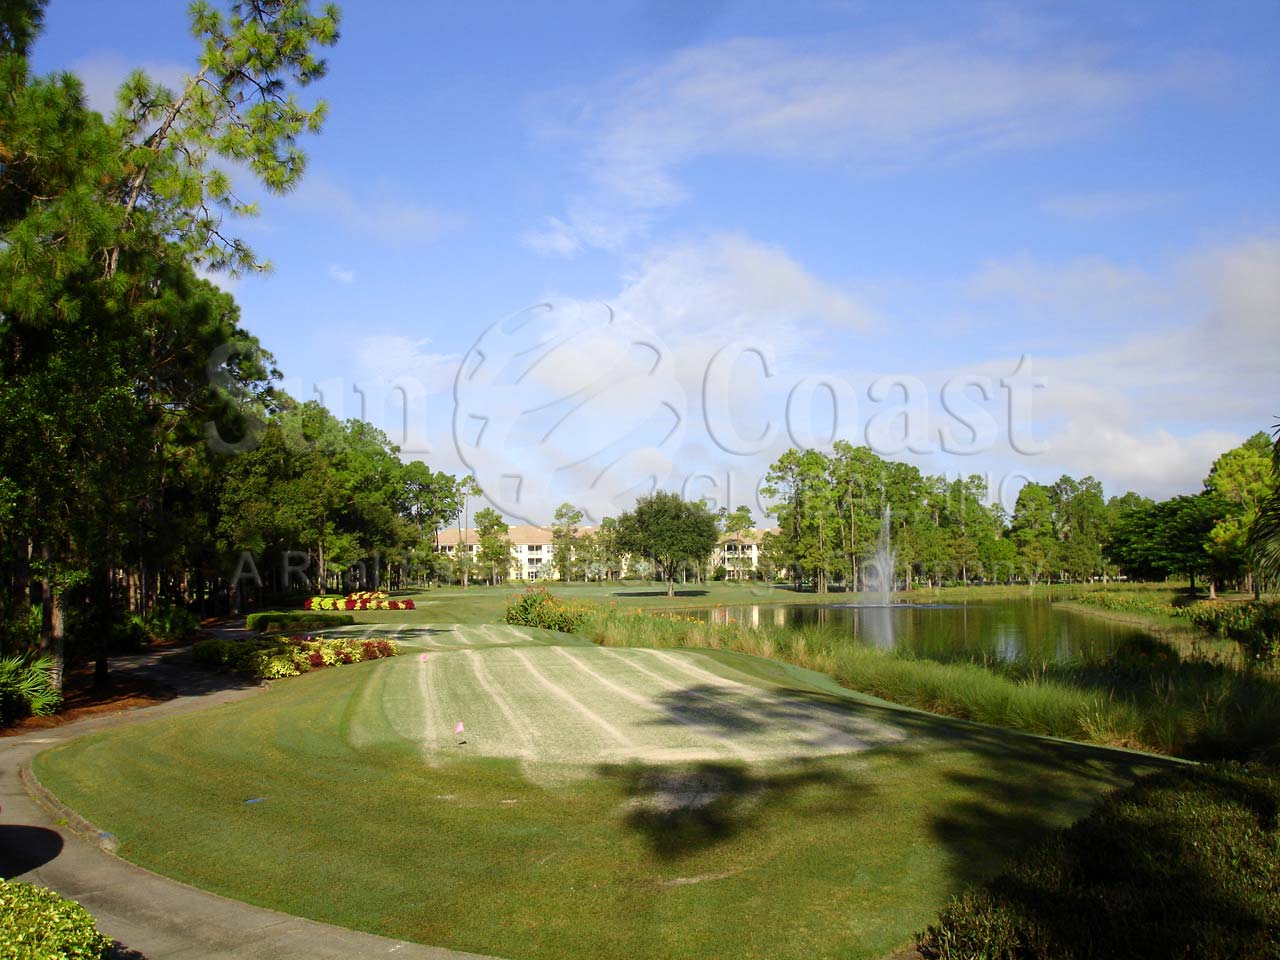 Waterford Community Golf Course overlooking the Community Lake and Fountain